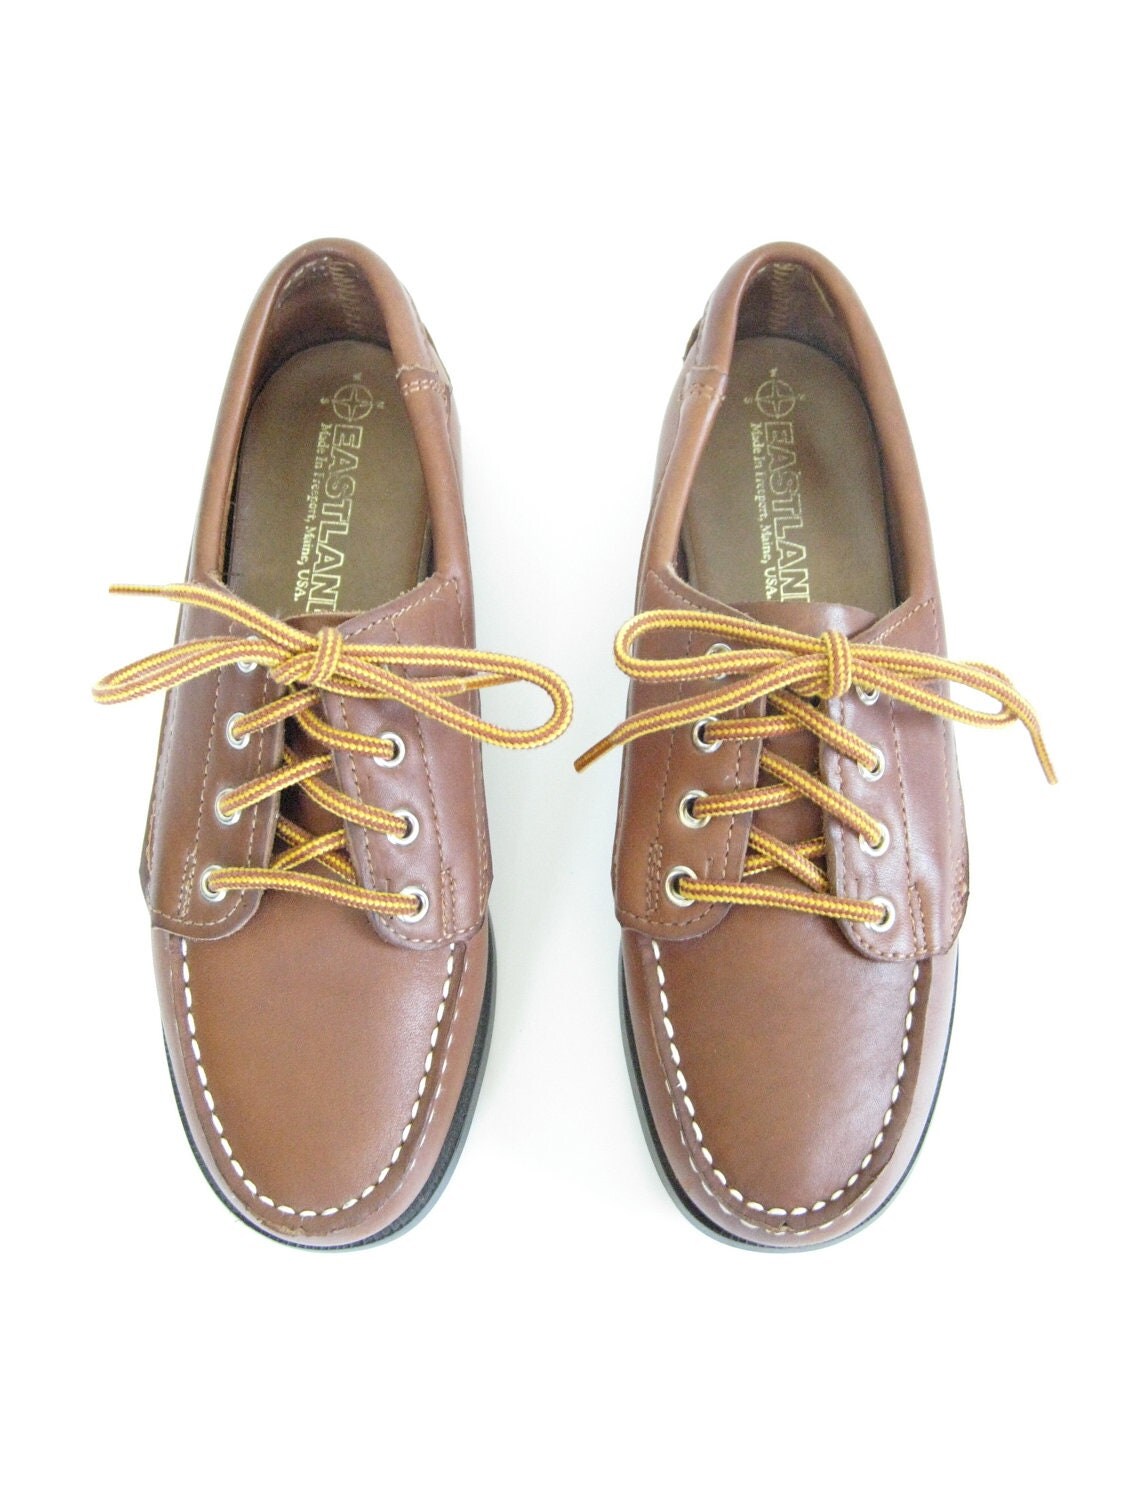 Eastland Brown Leather Lace-Up Loafers. Size 7. Preppy Classic